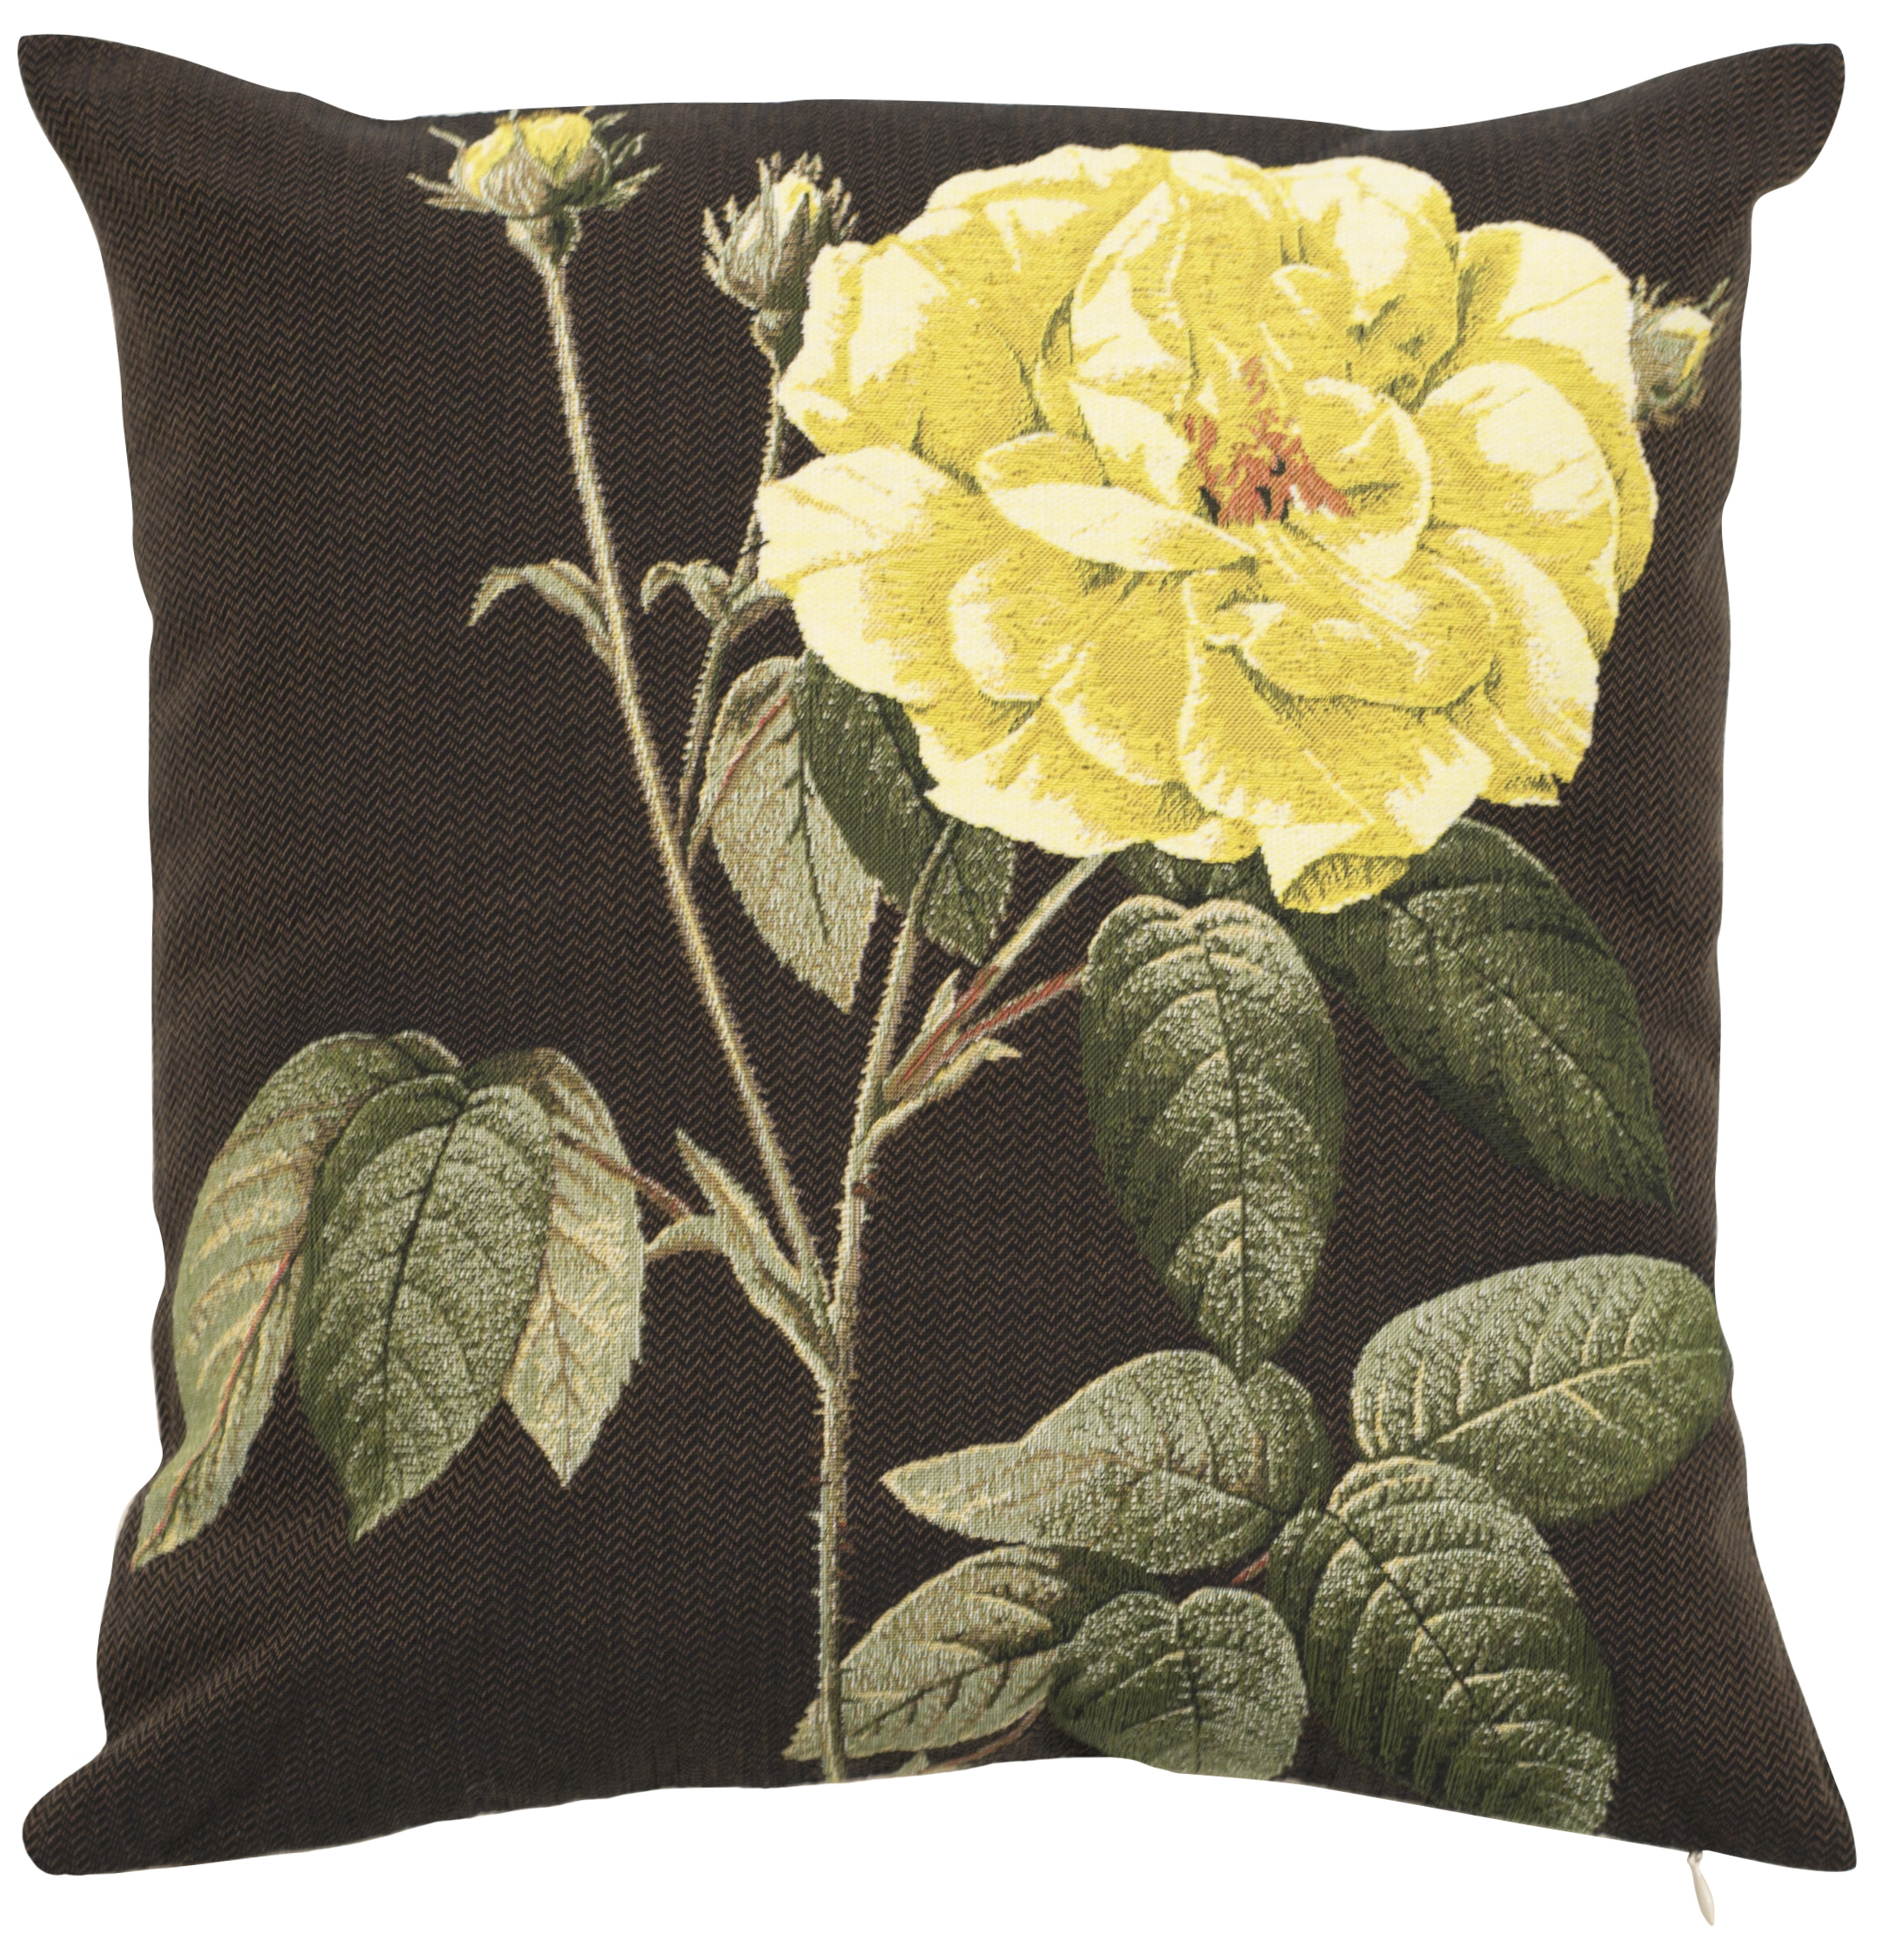 Pillow - Audrey - Yellow in Brown Background